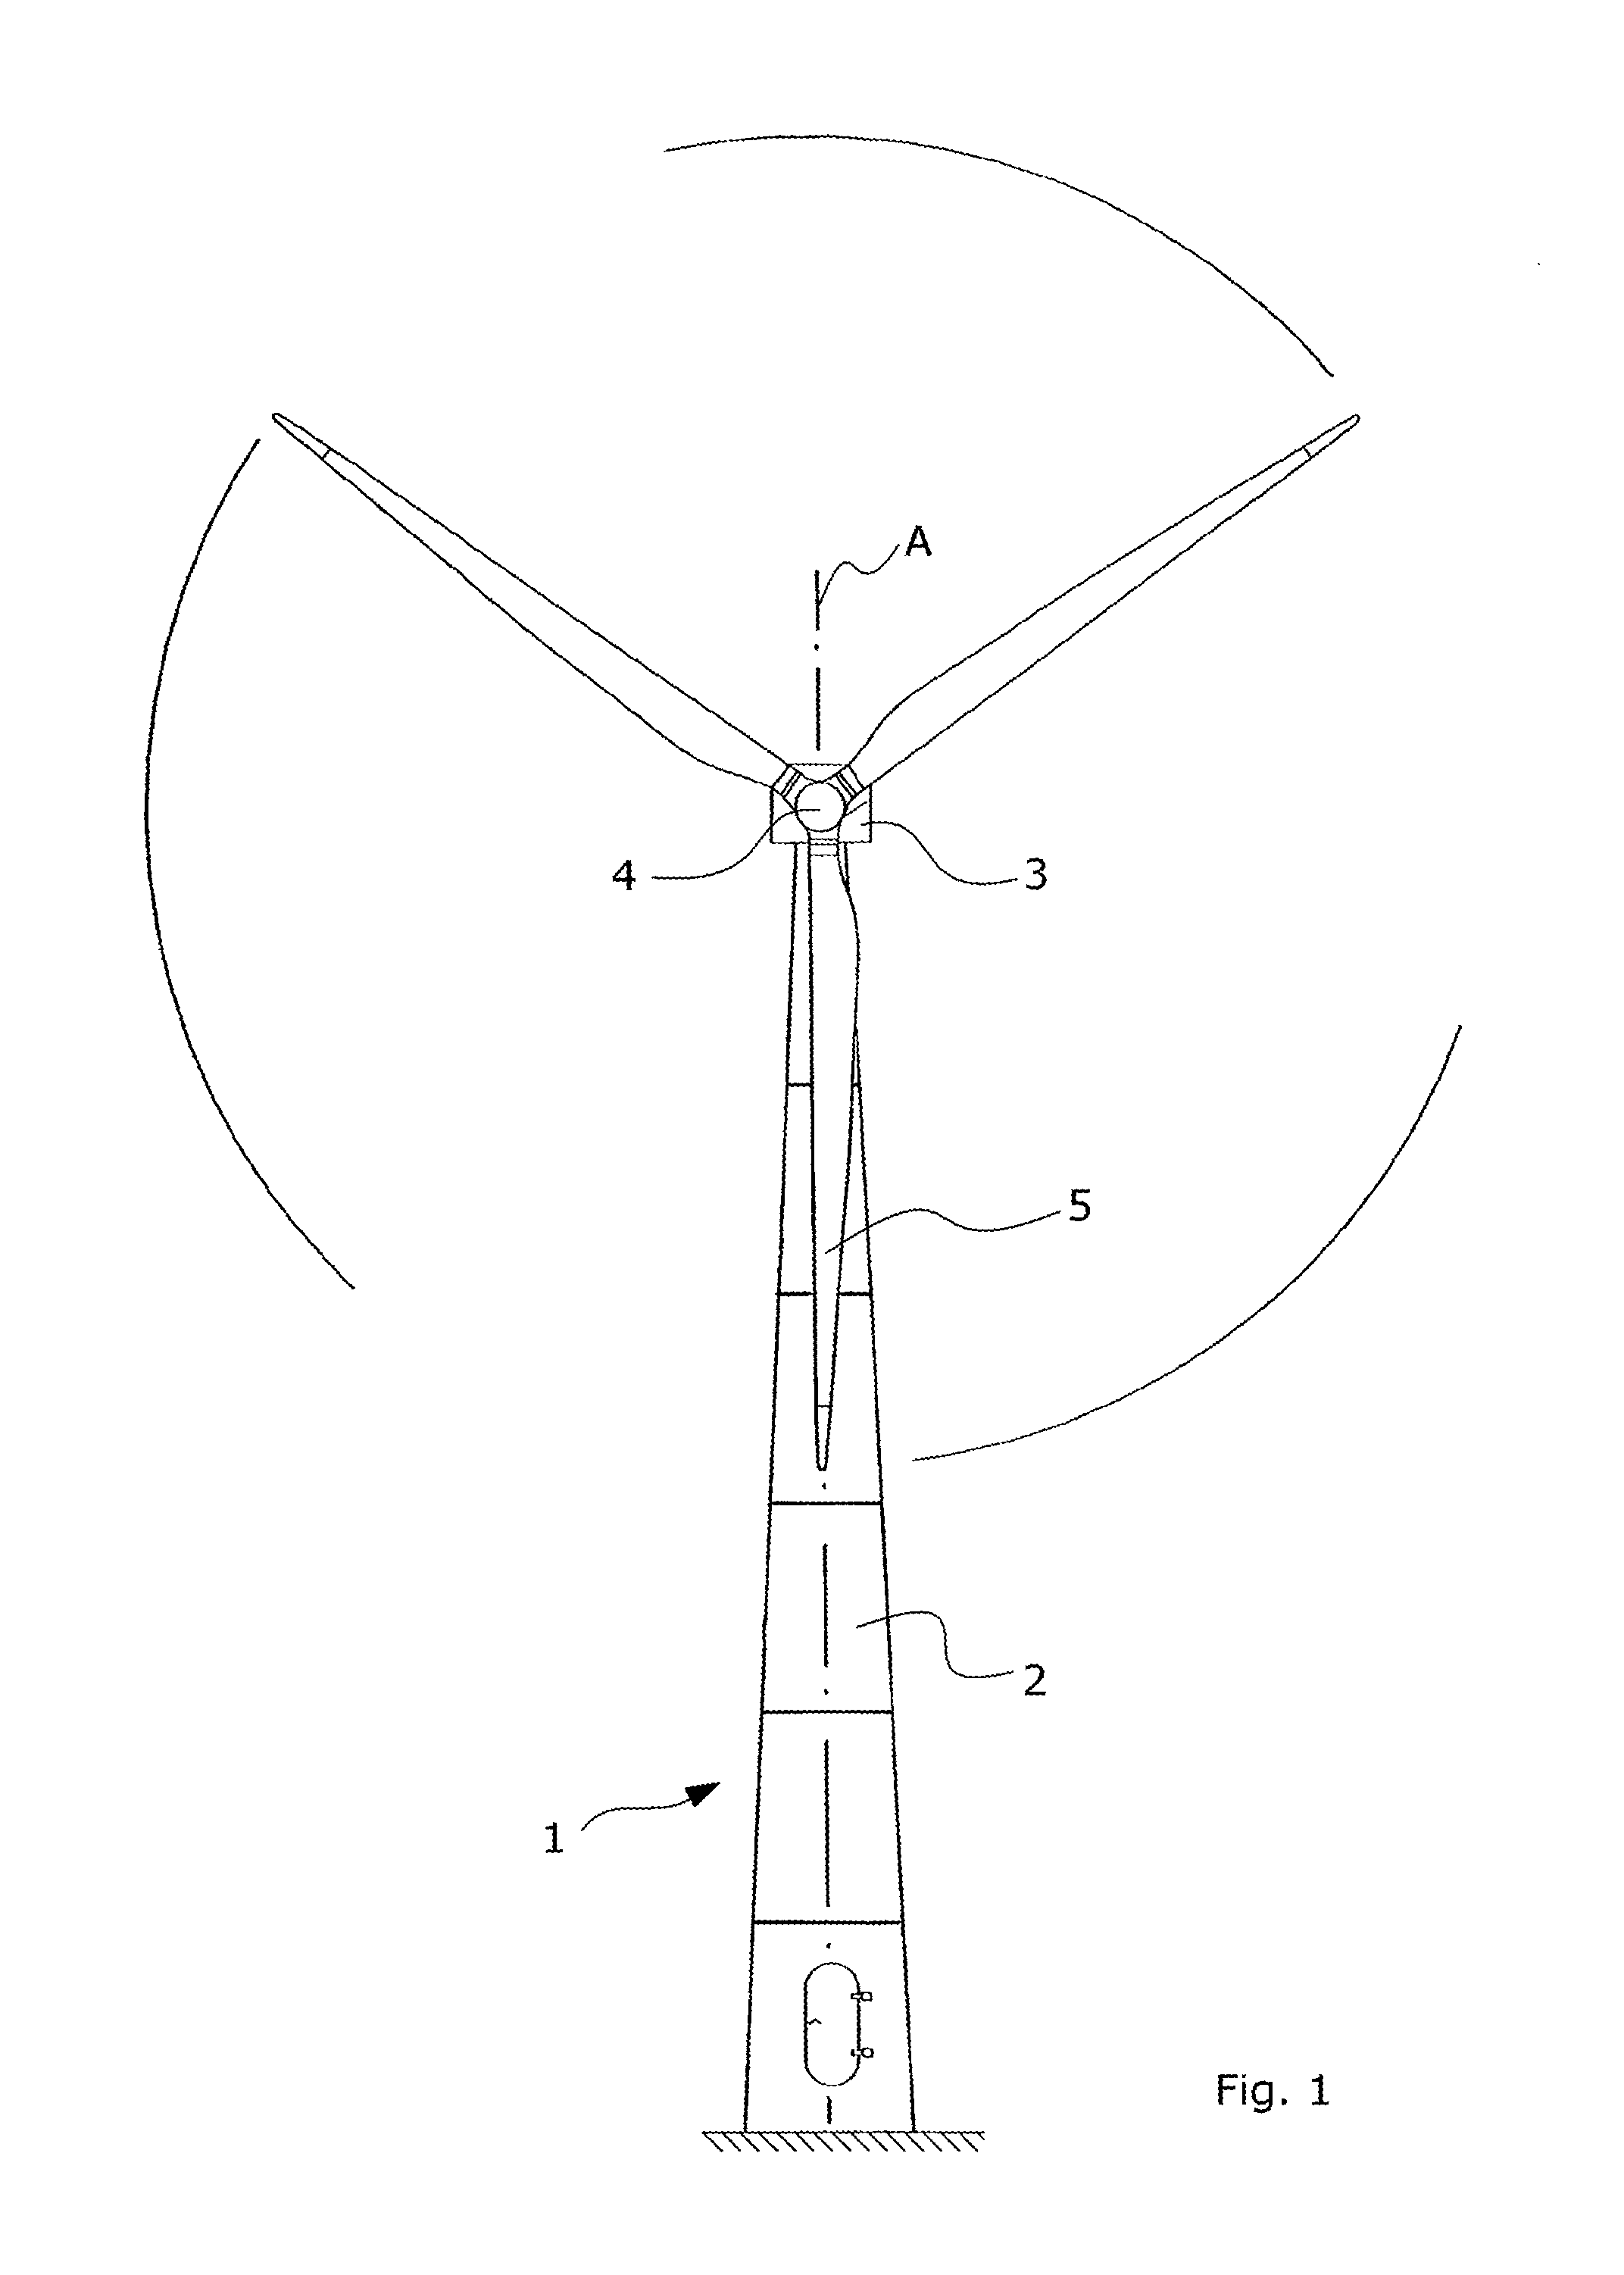 Method for installing a wind turbine, a nacelle for a wind turbine, and method for transporting elements of a wind turbine